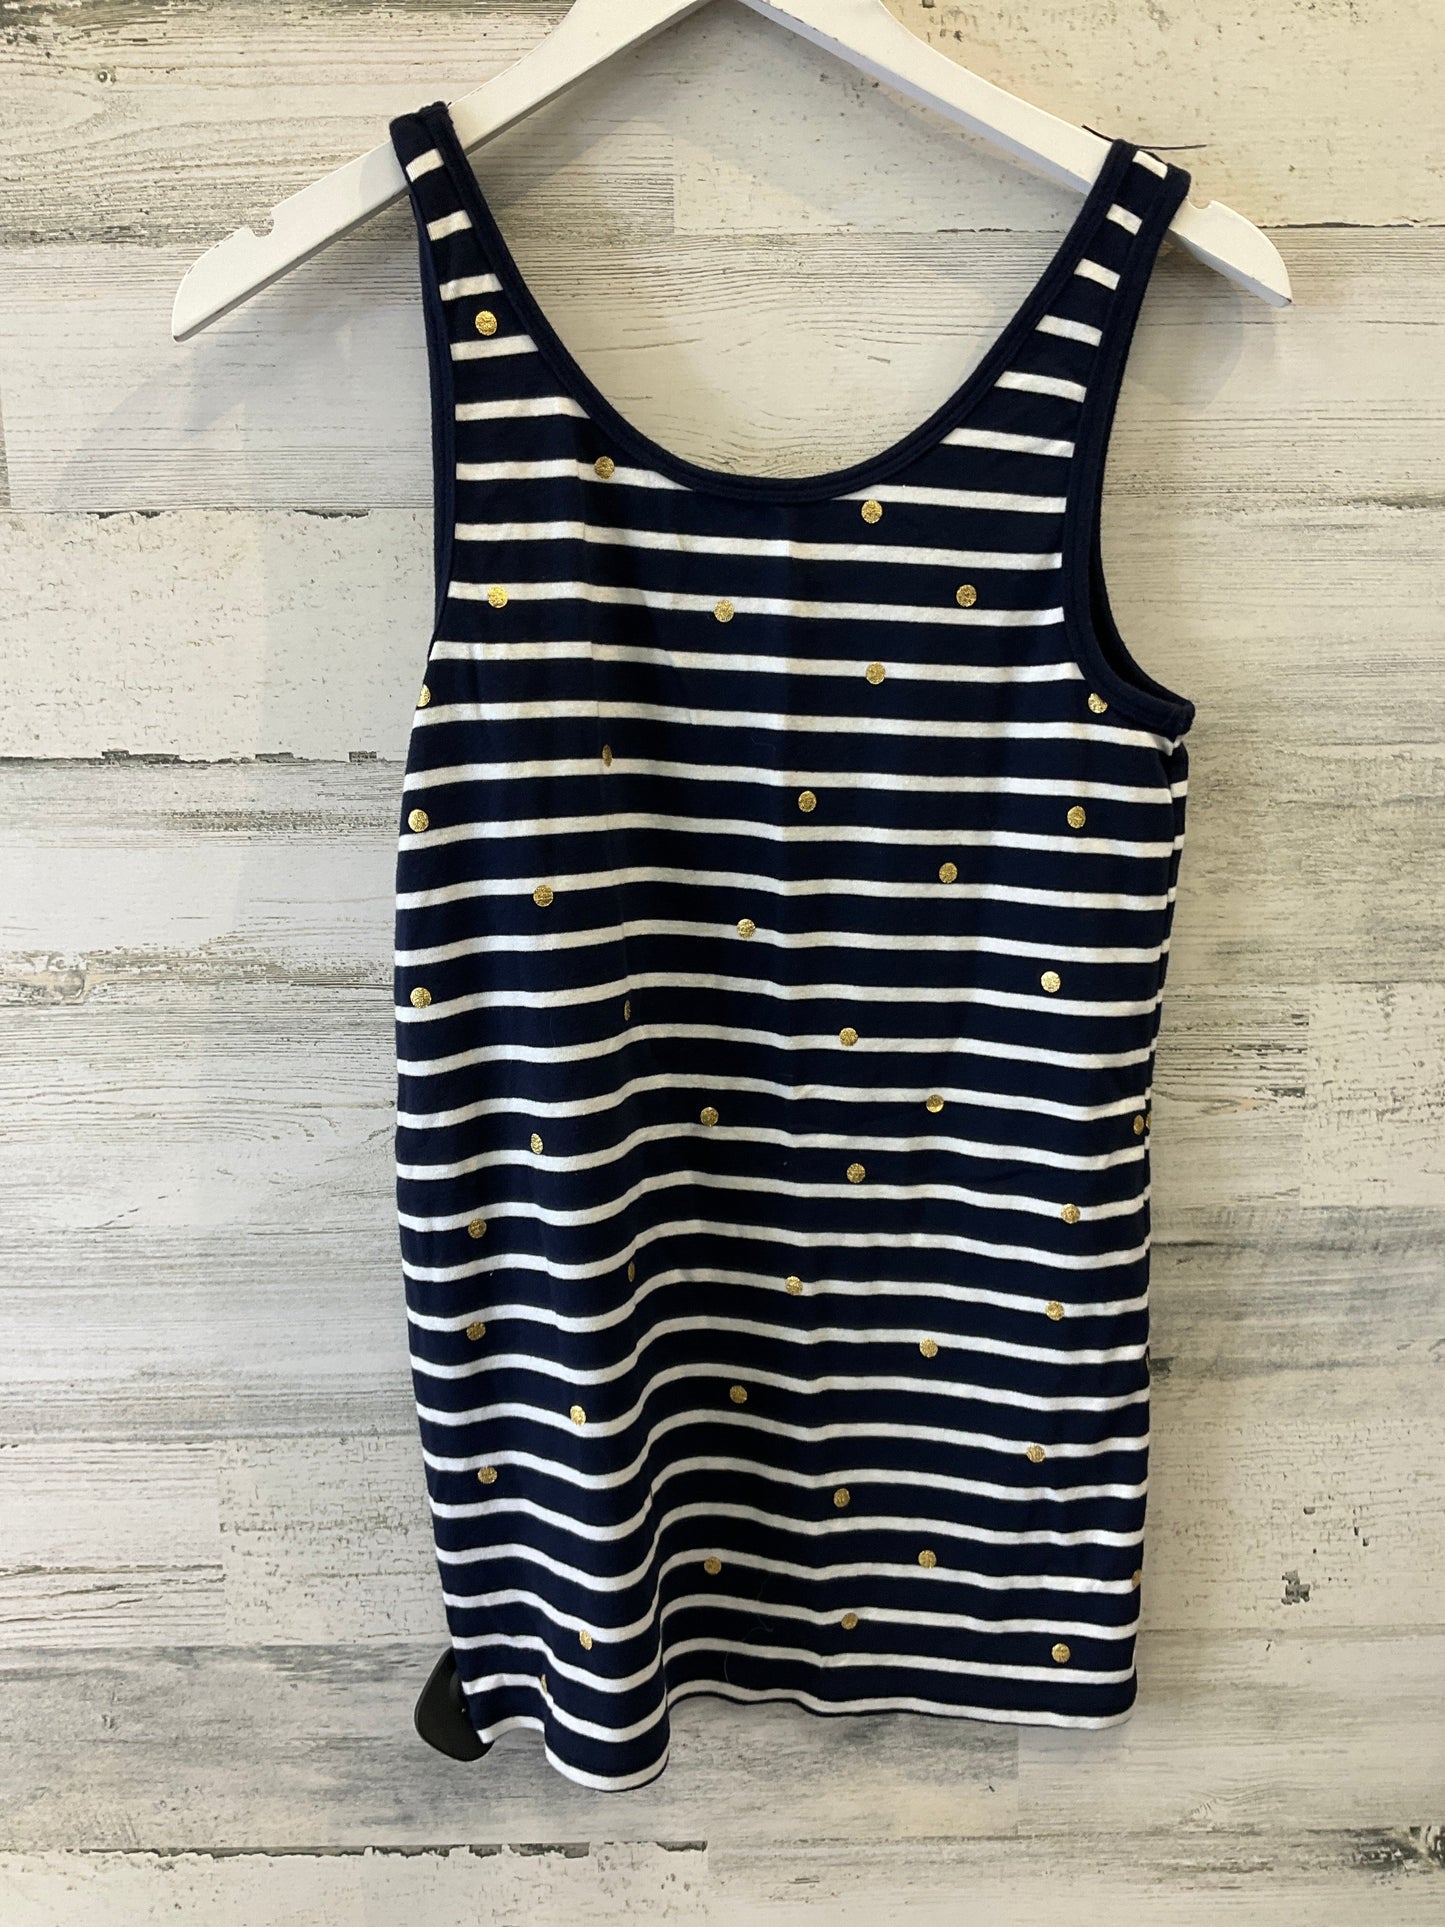 Navy Top Sleeveless A New Day, Size 2x